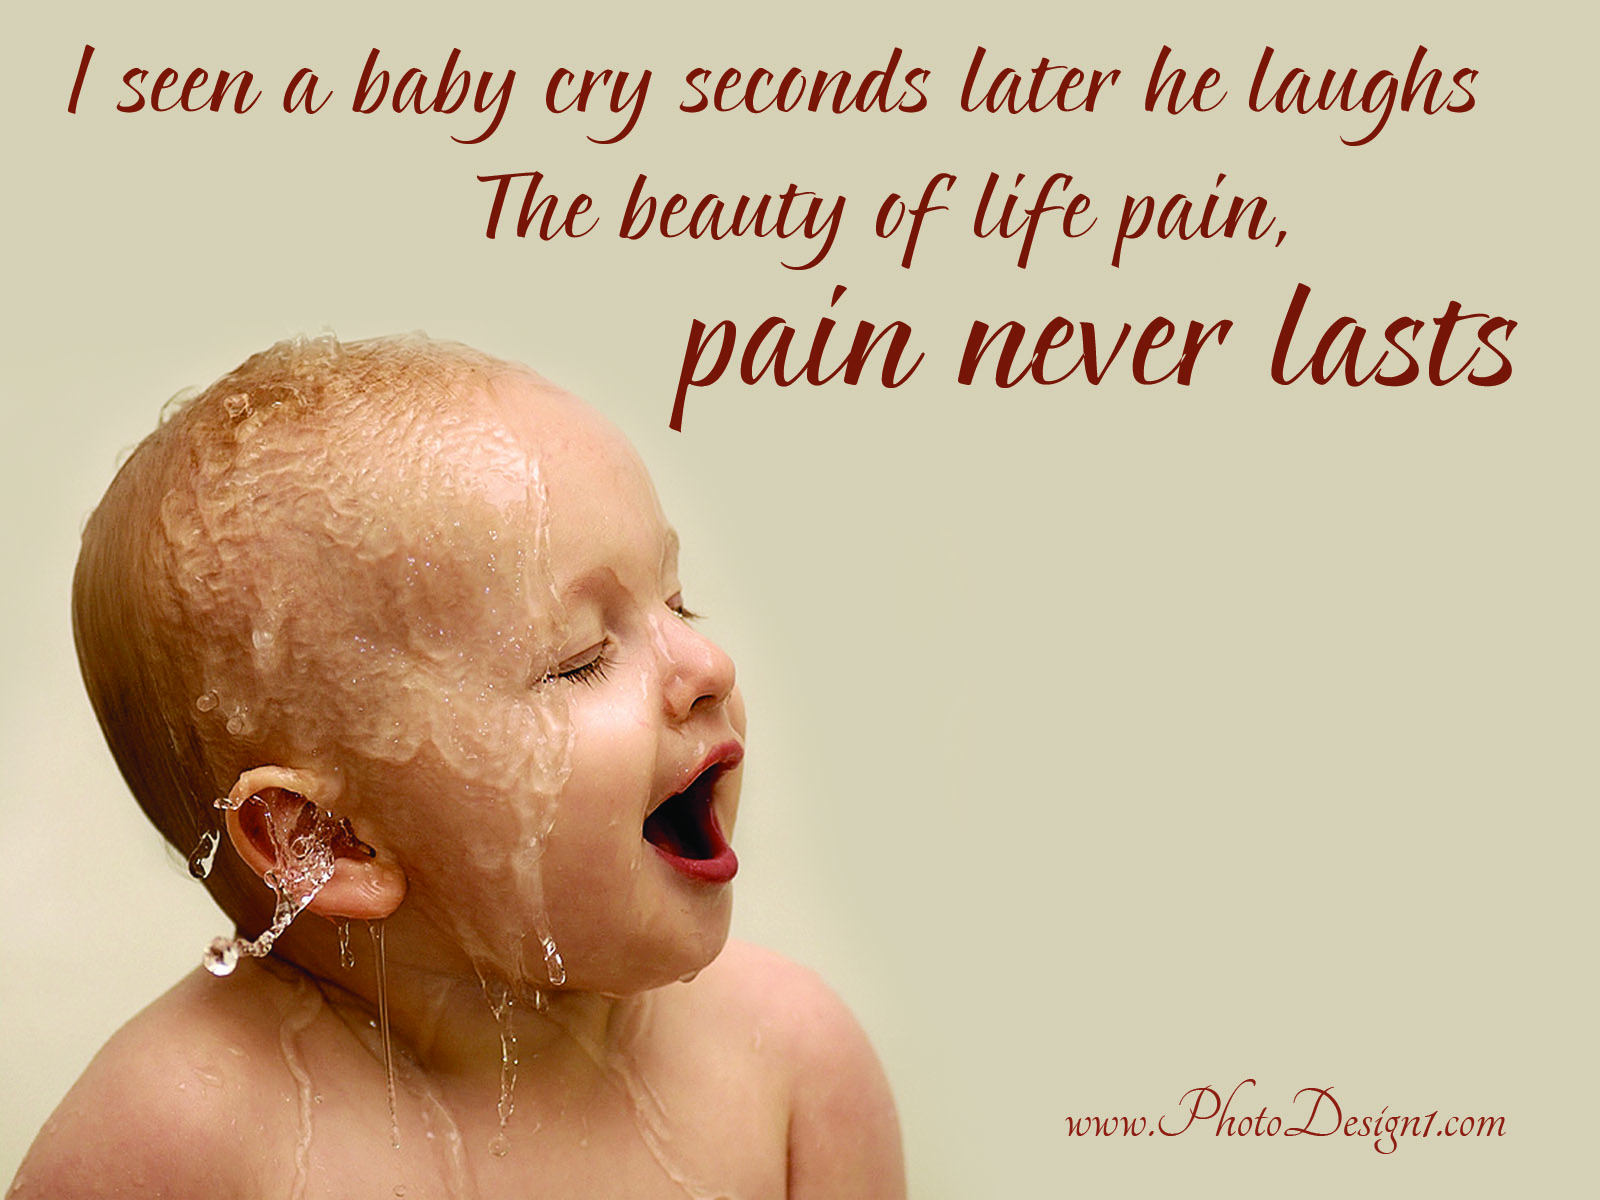 I seen a baby cry then seconds later she laughed. The beauty of life, the pain never lasts.